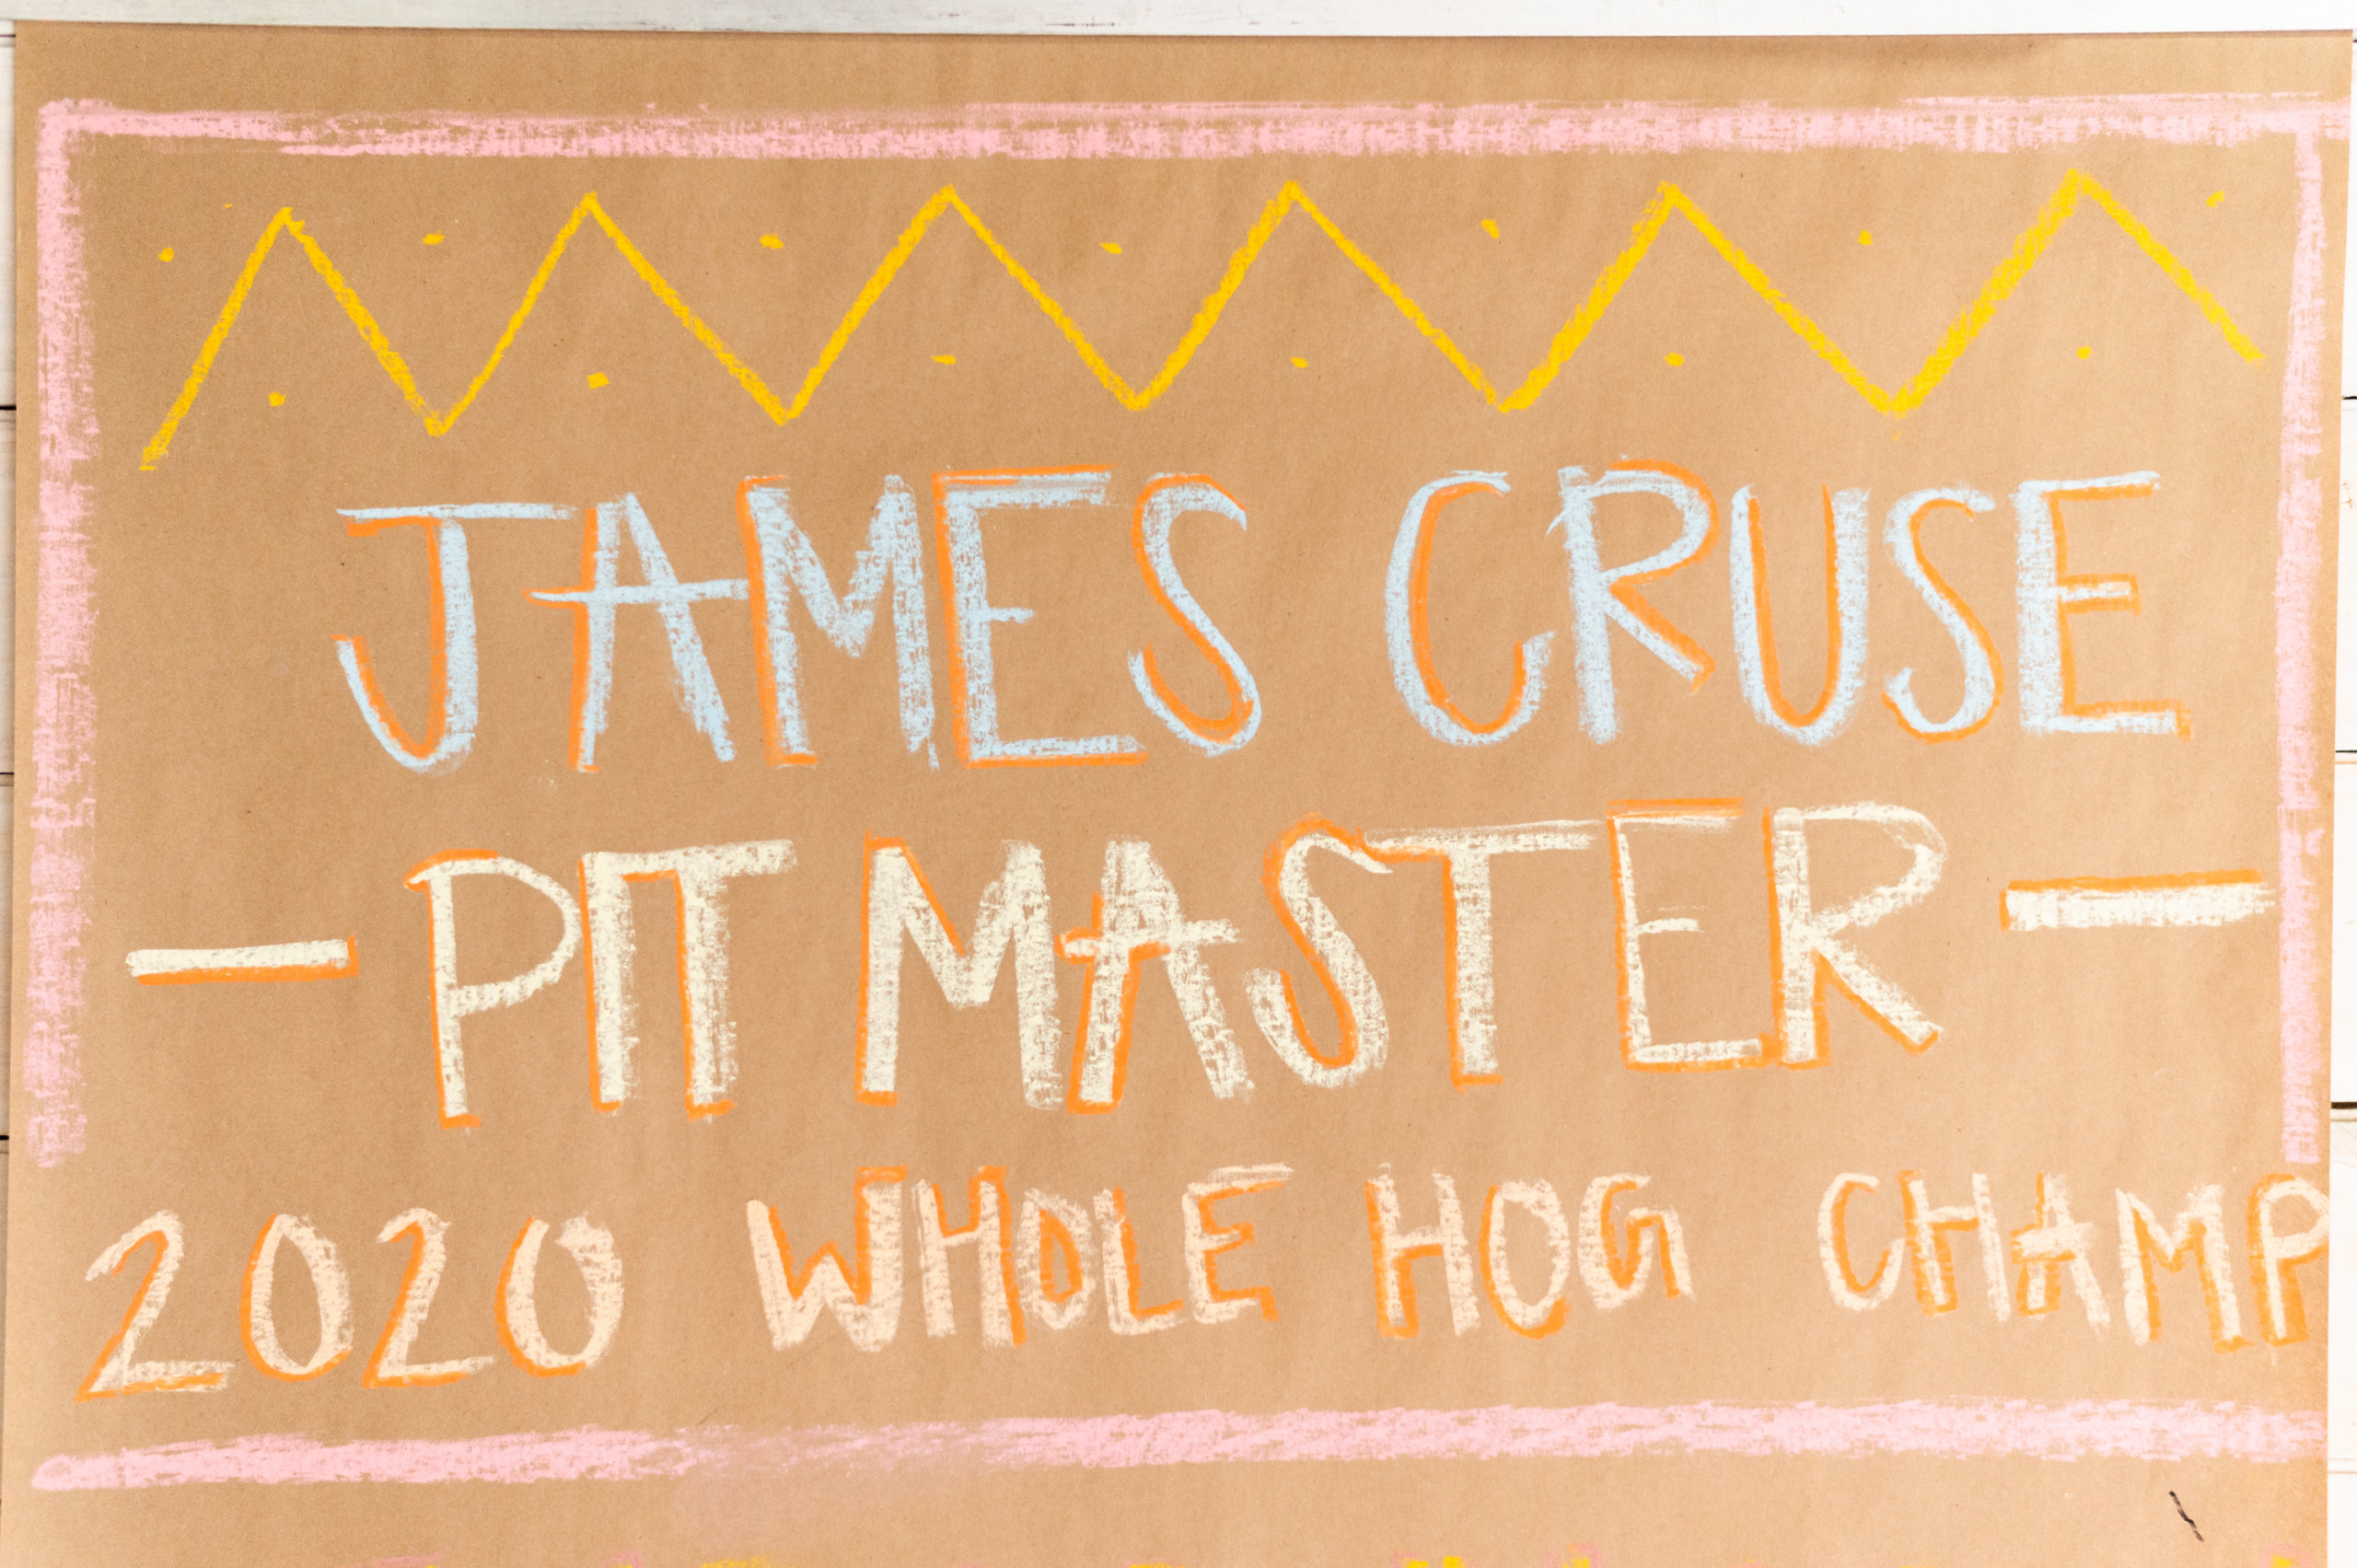 Inside Central City BBQ, a roll of butcher paper lists some of James Cruse's barbecue honors